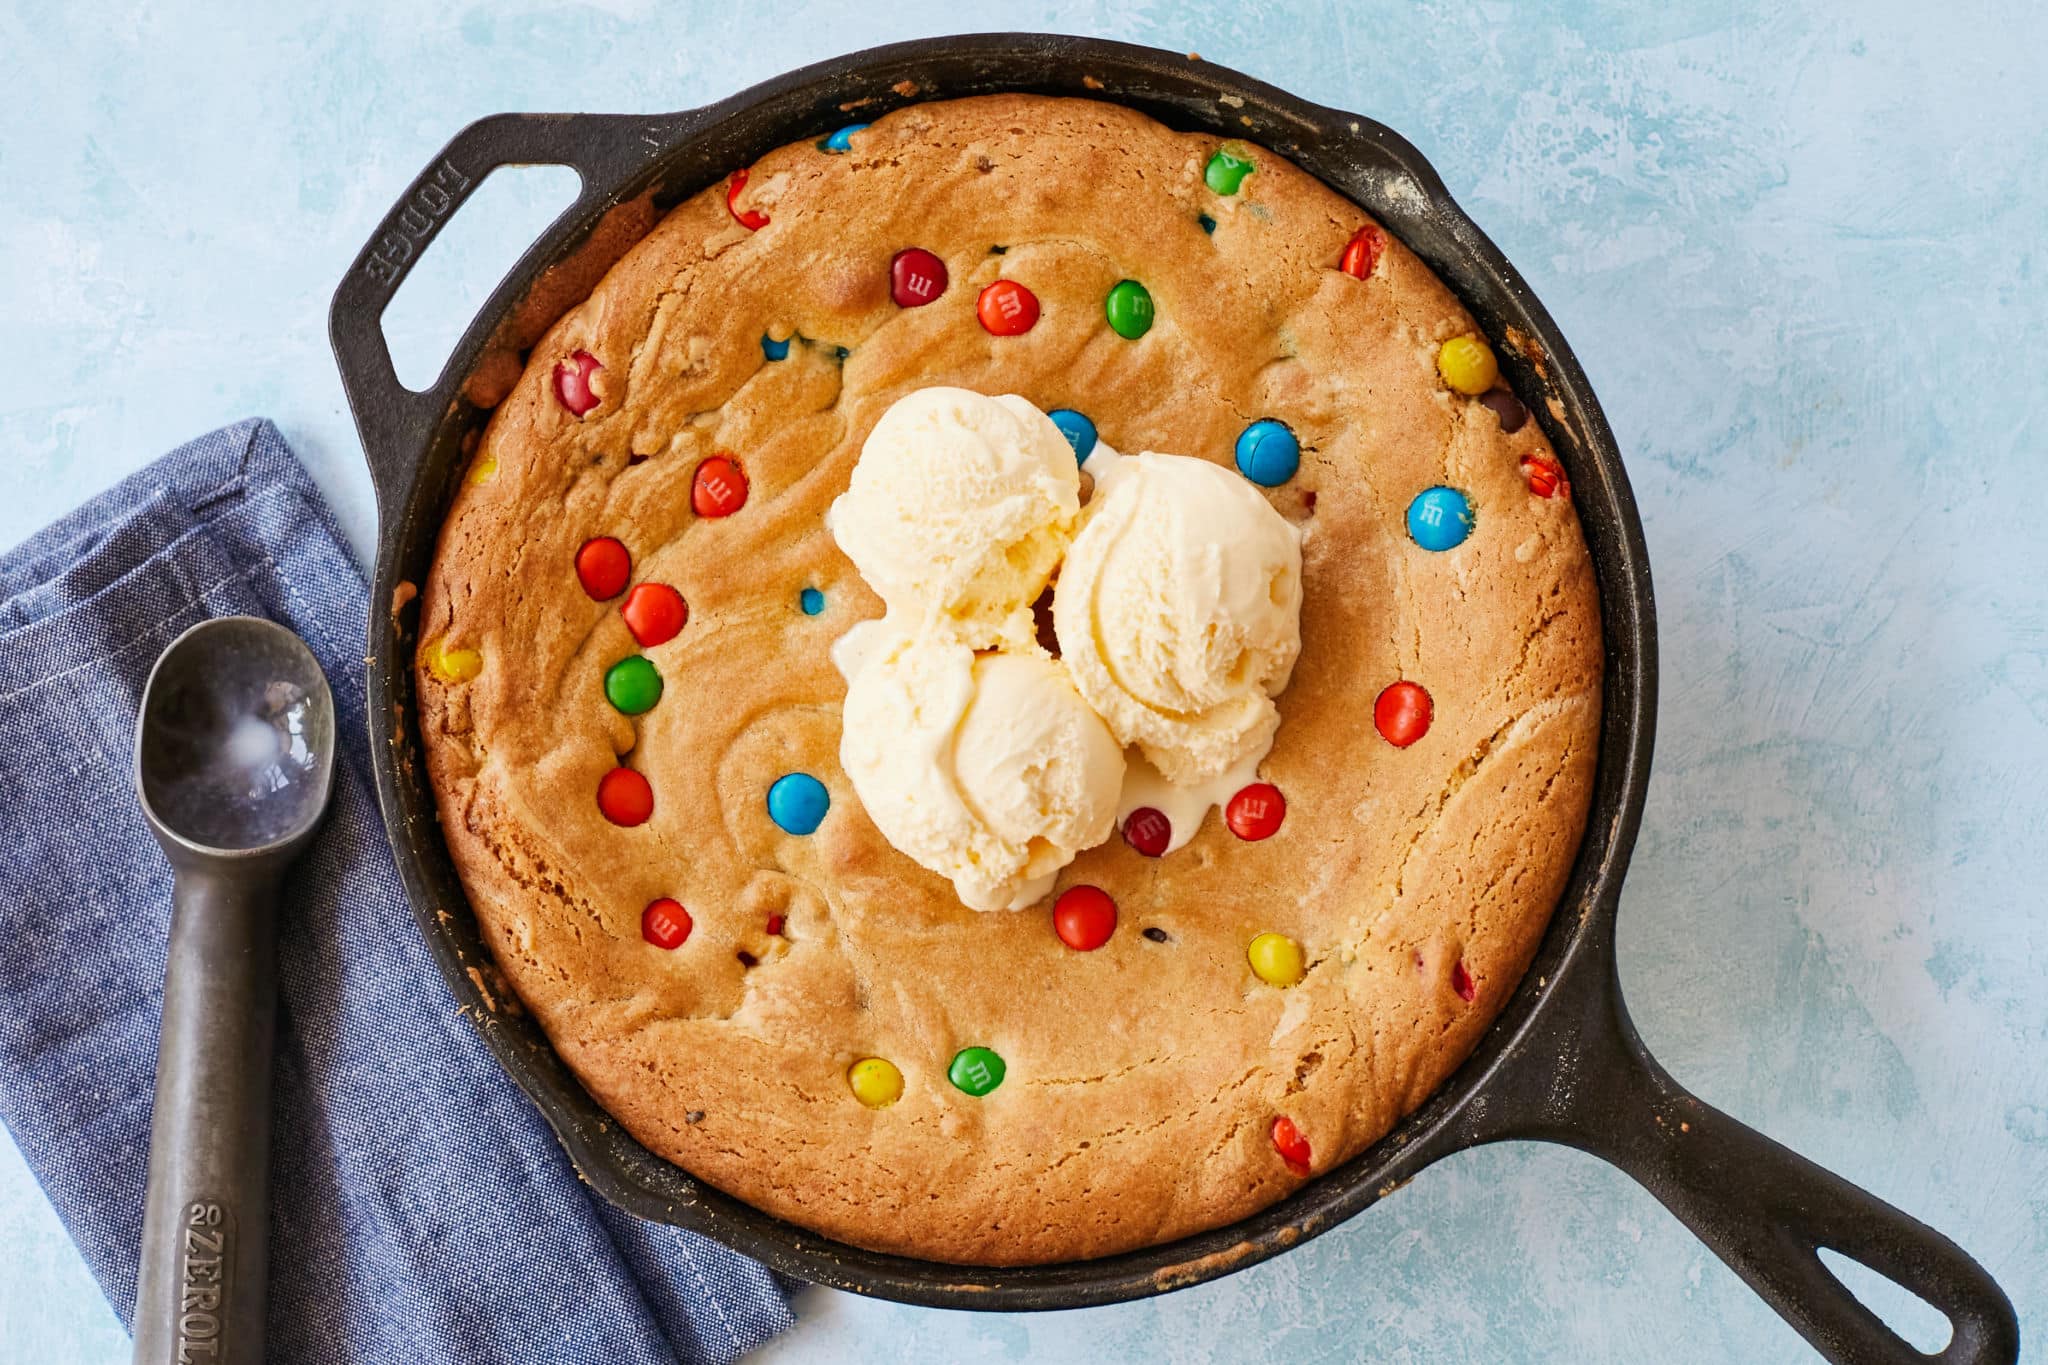 Top-down view of a skillet cookie.